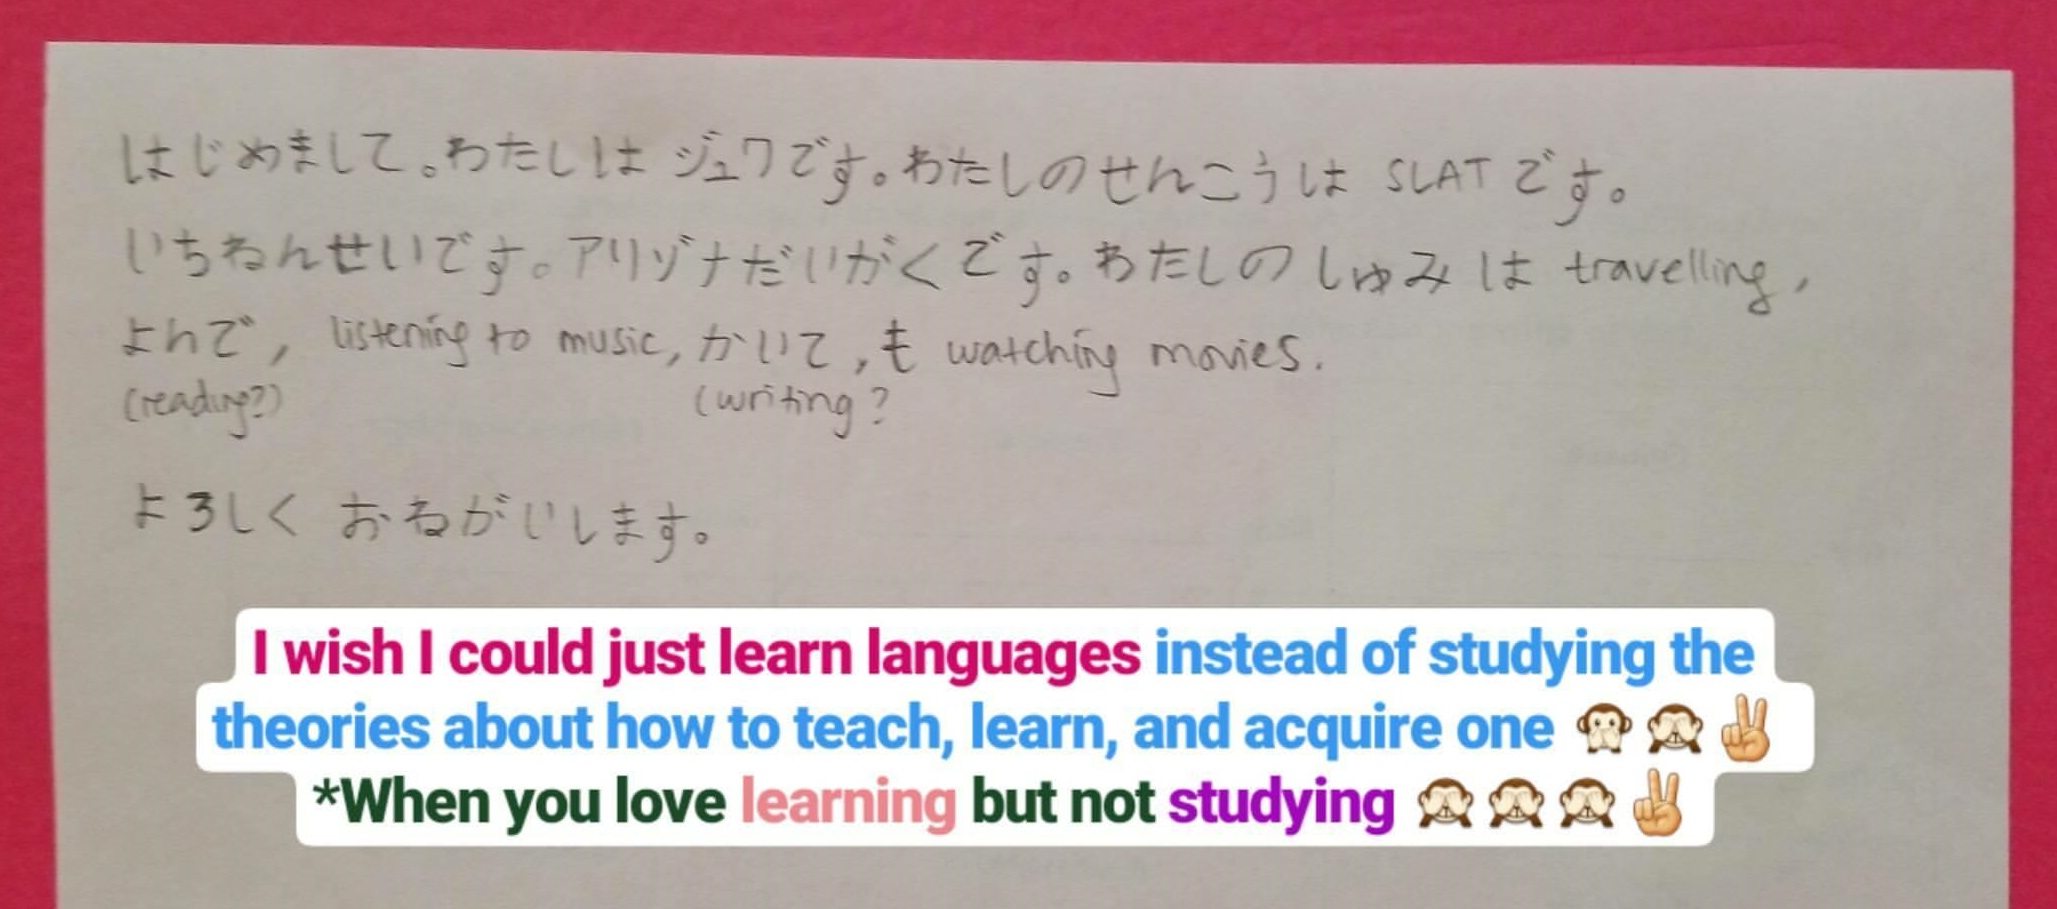 Highlights on my Japanese class: Foreign language teaching and learning